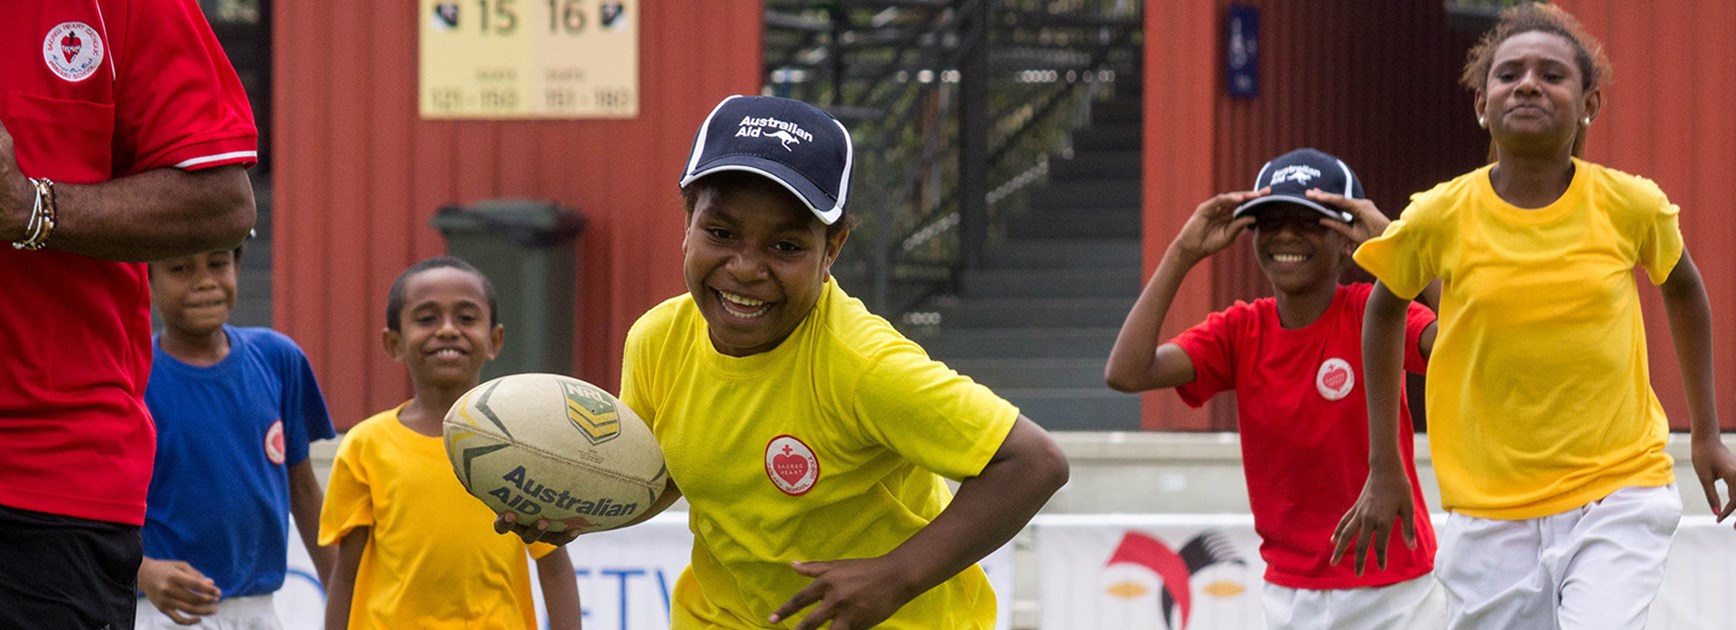 Rugby League-themed program is improving community attitudes towards girls and women, especially in schools.